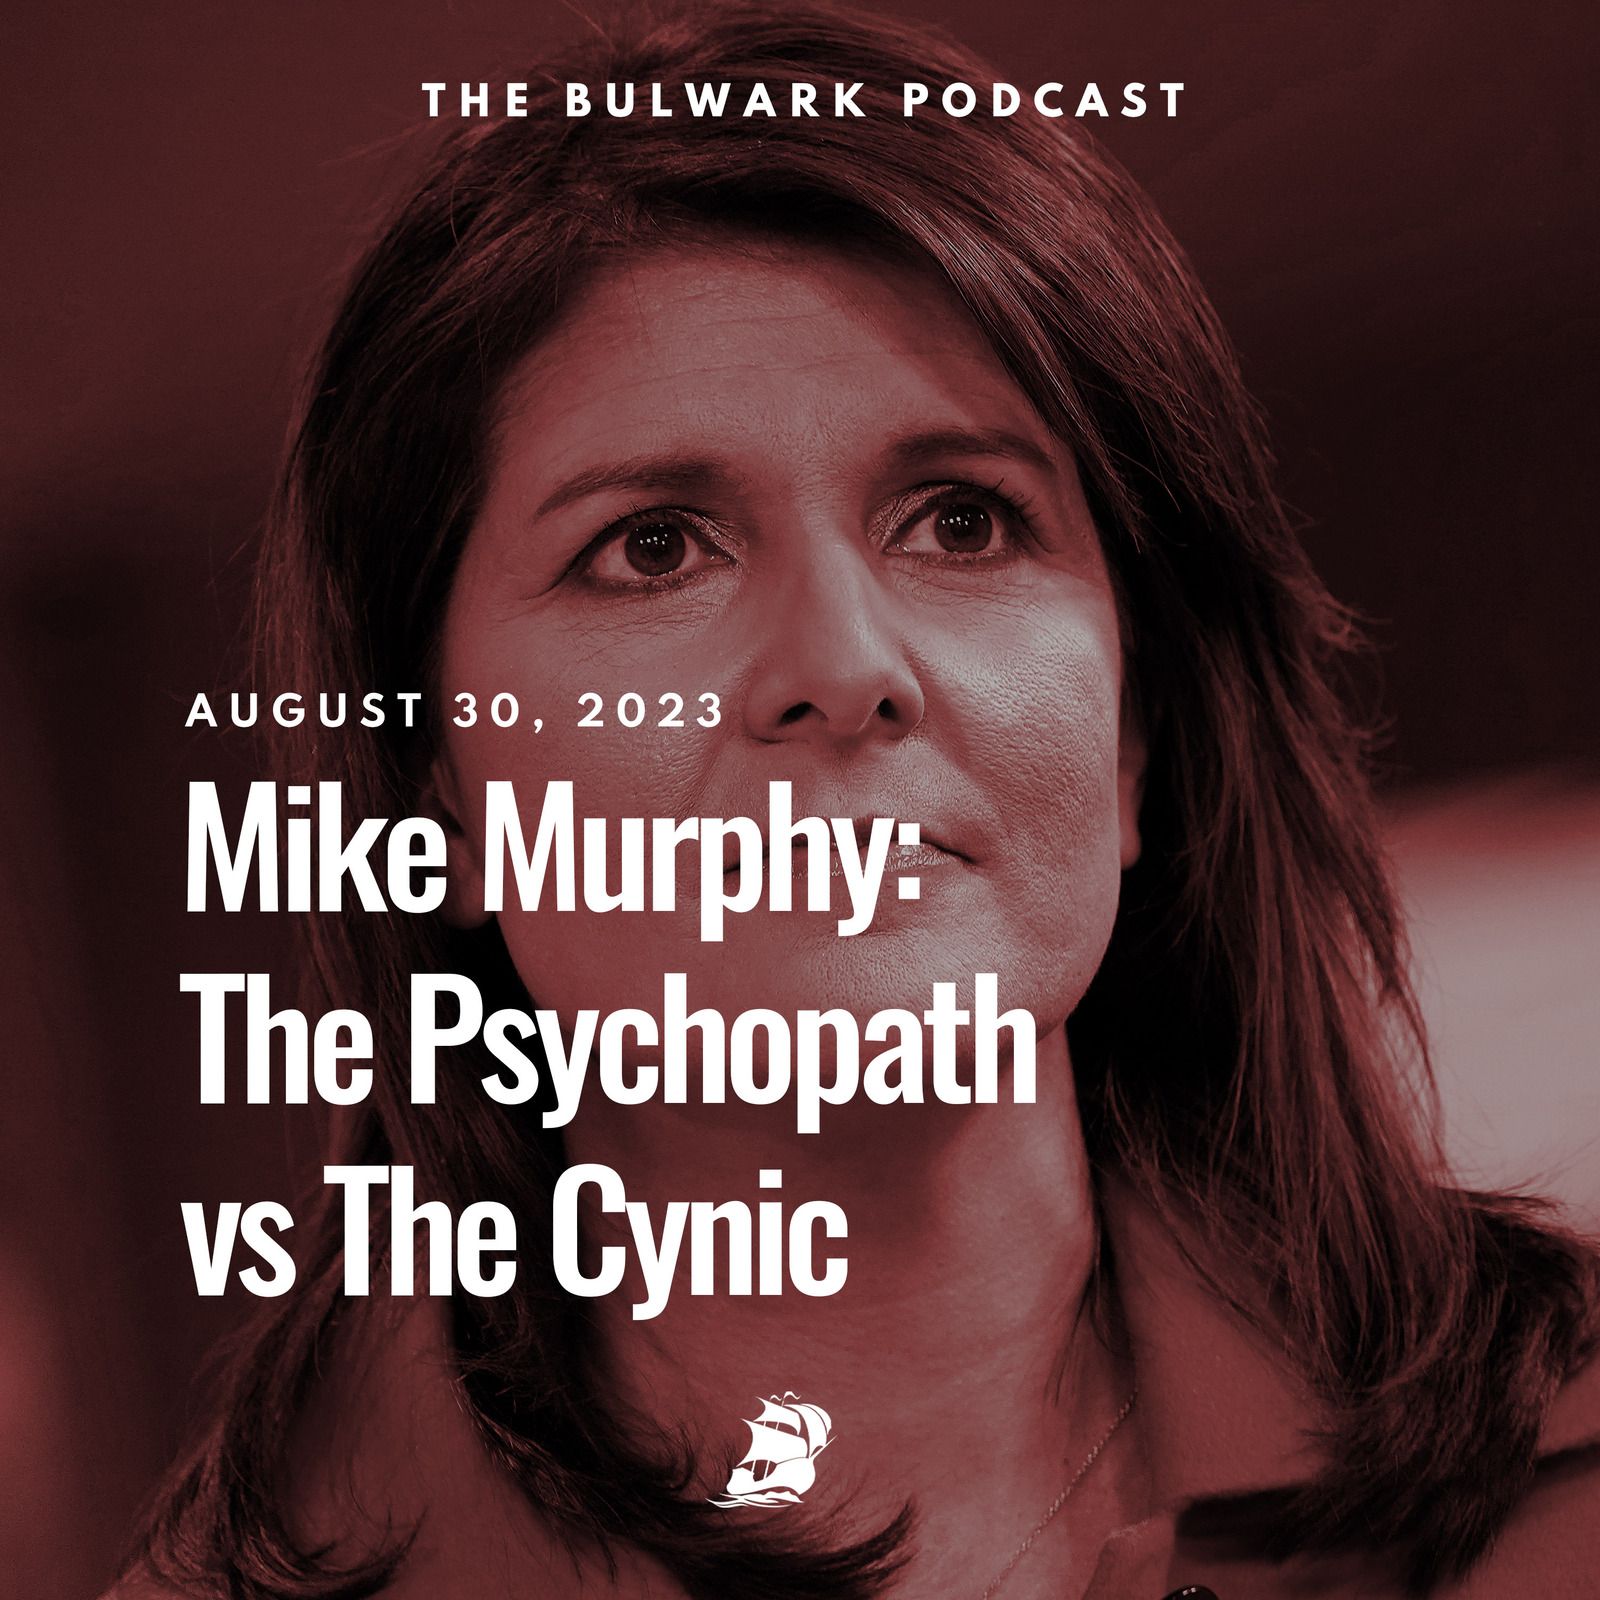 Mike Murphy: The Psychopath vs The Cynic by The Bulwark Podcast